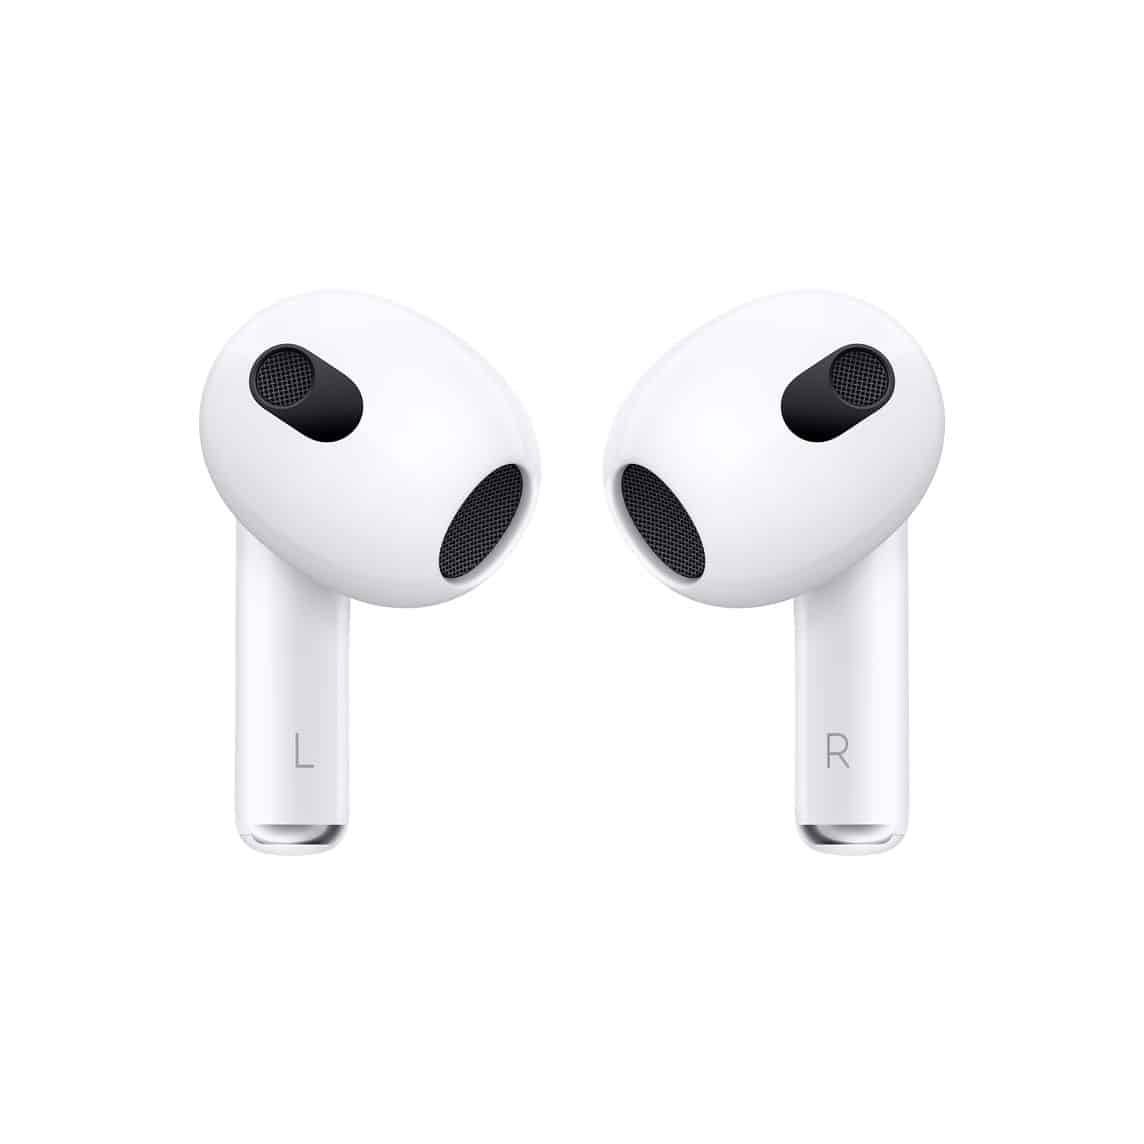 airpods 3 apple amazon australia accessories android anc argos and pro store availability bán buy black friday bao giờ ra mắt battery life best sale deals box case cellphones có gì mới chính hãng controls costco cost cover canada design discount difference dubai double tap dimensions don't fit dolby atmos price ear tips hooks expected egypt engraving emag ee eesti ebay in india fpt fake shop features find my firmware for reddit functions giá generation generacion gestures vs geração gsmarena 3rd review hoangha hổ vằn hcm hà nội hnam hay harga how to use have noise cancellation hurt ears indonesia instructions istyle us issues jbhifi john lewis jarir jordan jon prosser jeftinije jumia jumbo japan kuwait kaina kopen kaufen keep falling out klarna ksp kılıf disconnecting ksa launch date leather latest latency lossless lightning lebanon look lowest mua made vietnam malaysia magsafe manual microphone release media markt cancelling near me new nz news not connecting or officeworks on offer o2 order online oman usa pakistan philippines uae qatar qiymeti quality qi charging quiet qvc charger sound call rep 2021 rumors uk shopdunk specs spatial audio settings singapore silicone size skin tinhte thegioididong tiki target transparency mode touch teardown too big test unboxing update user guide usb c uncomfortable 2 và vn/a việt nam về vn walmart waterproof wireless worth it wiki with weight where what's xcite x airdots xiaomi xataka ray youtube year yerevan yandex market yoho yorum yupoo years later warranty zap zoomer za zhihu zagreb zain zarna zora zoomit zu groß 1 dk sell đặt hàng đánh màu đen 1st copy 179 11 15 18 may windows 10 ios 14 2022 2020 3d model 360 view marshall minor 4b61 4b66 4pda 4b52 4 freebuds 5mm 52audio 5 0 5/18 bluetooth max mm 6 months music iphone get free 7 jabra elite 75t kompatibel mit 8 85t 9to5mac will there be a connect xbox 30€ 30 euro (3 generación) geração) b&o e8 3usb 3type cstore between does dbrand did come pros elago of 3case everything etui funda force sensor forbes fnac galaxy buds live gucci plus geräuschunterdrückung gen huawei much hd charge are the reset wear is better i jb hi fi jual jastip joyroom kapan rilis di kate spade khi nào kogan kuo kiedy nowe keynote leaked macrumors ming chi iii mous optus otterbox original oneplus ozbargain open pre powerbeats pair precio prix lulu refurbished rtings should wait spigen playing setup tai nghe t mobile twitter tws upcoming uag using verizon volume control very vidvie vodafone when coming which what what's redmi pixel xl can you share after last ne zaman nesil çıkacak satışa çıkar zealand 13 12 sony wf-1000xm4 nothing wf-1000xm3 belkin event 24 defective 3vs 3pro 4i top under 3000 6s t8 36 type d aoly d3 d'emploi d&r pas de klang e katalog differenza tra confronto differenze watch smart f35 300 30w j3 samsung cases beats studio compare currys casetify cnet comparison catalyst airpodspro 3have airpods2 3and 3come 3in resistant l'eau o meglio solo generazione 3e751 3a283 s3 at&t don't u v3 v3m v2 v 2nd w wavefun professional diferencia entre y comparacion comparar diferencias comparativa 3-in-1 & mophie fois sans frais playstation элемент eq